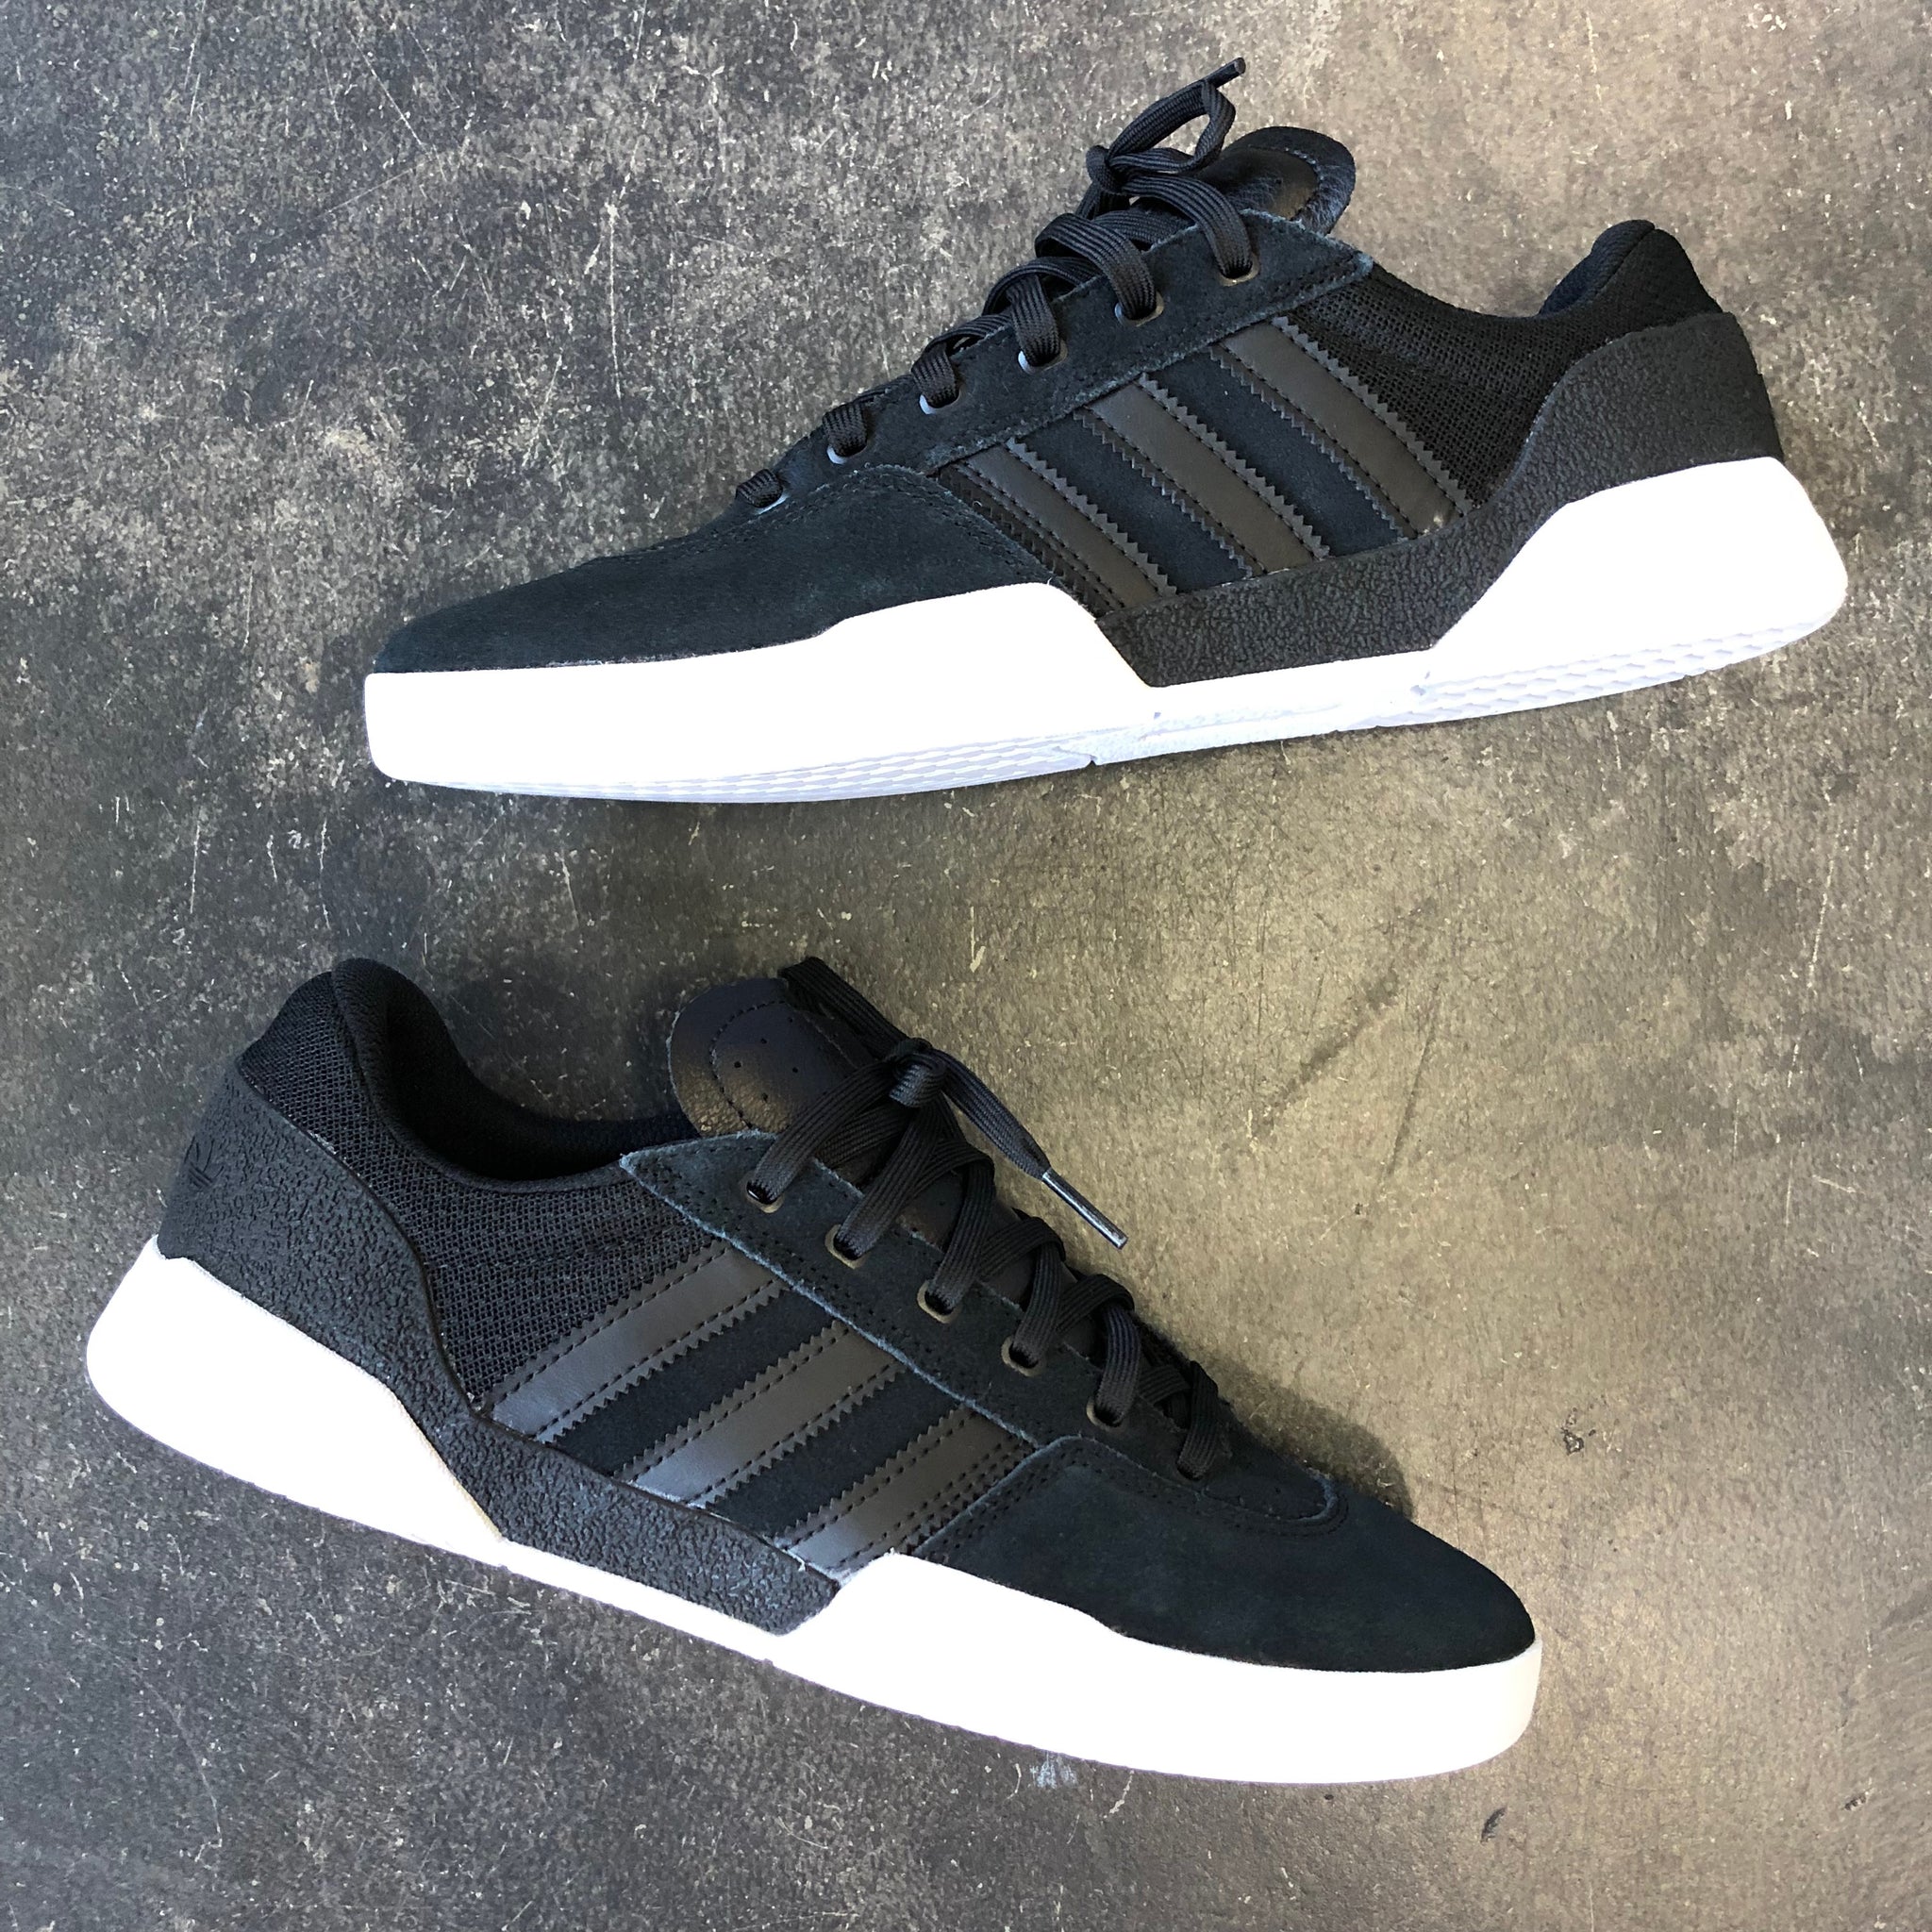 adidas city cup black and white